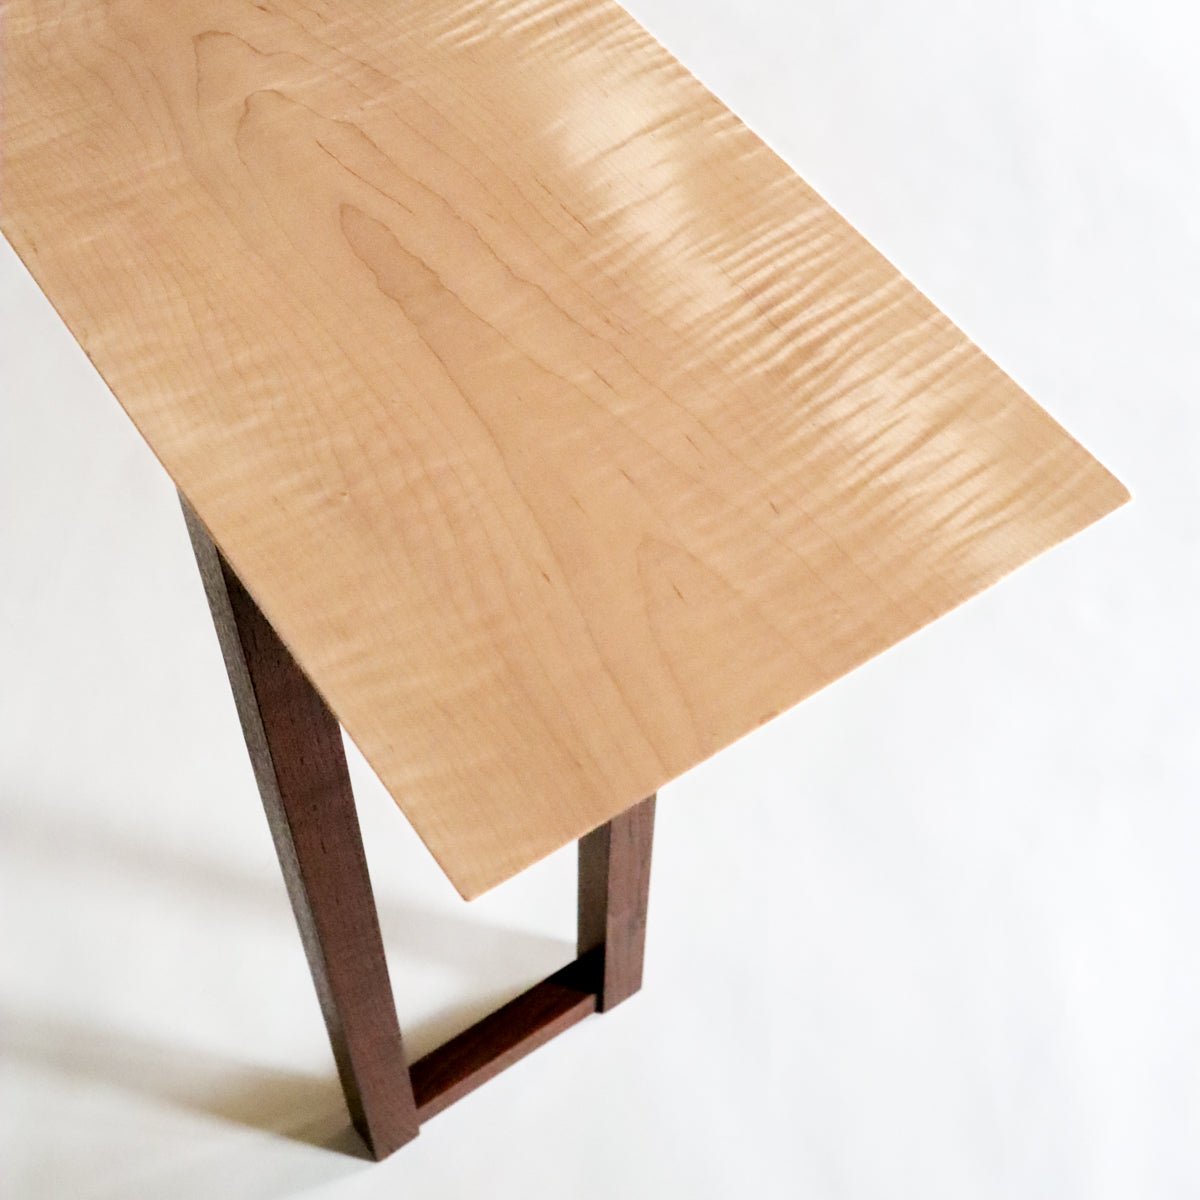 This is a tiger maple table top on a skinny console table created by Mokuzai Furniture.